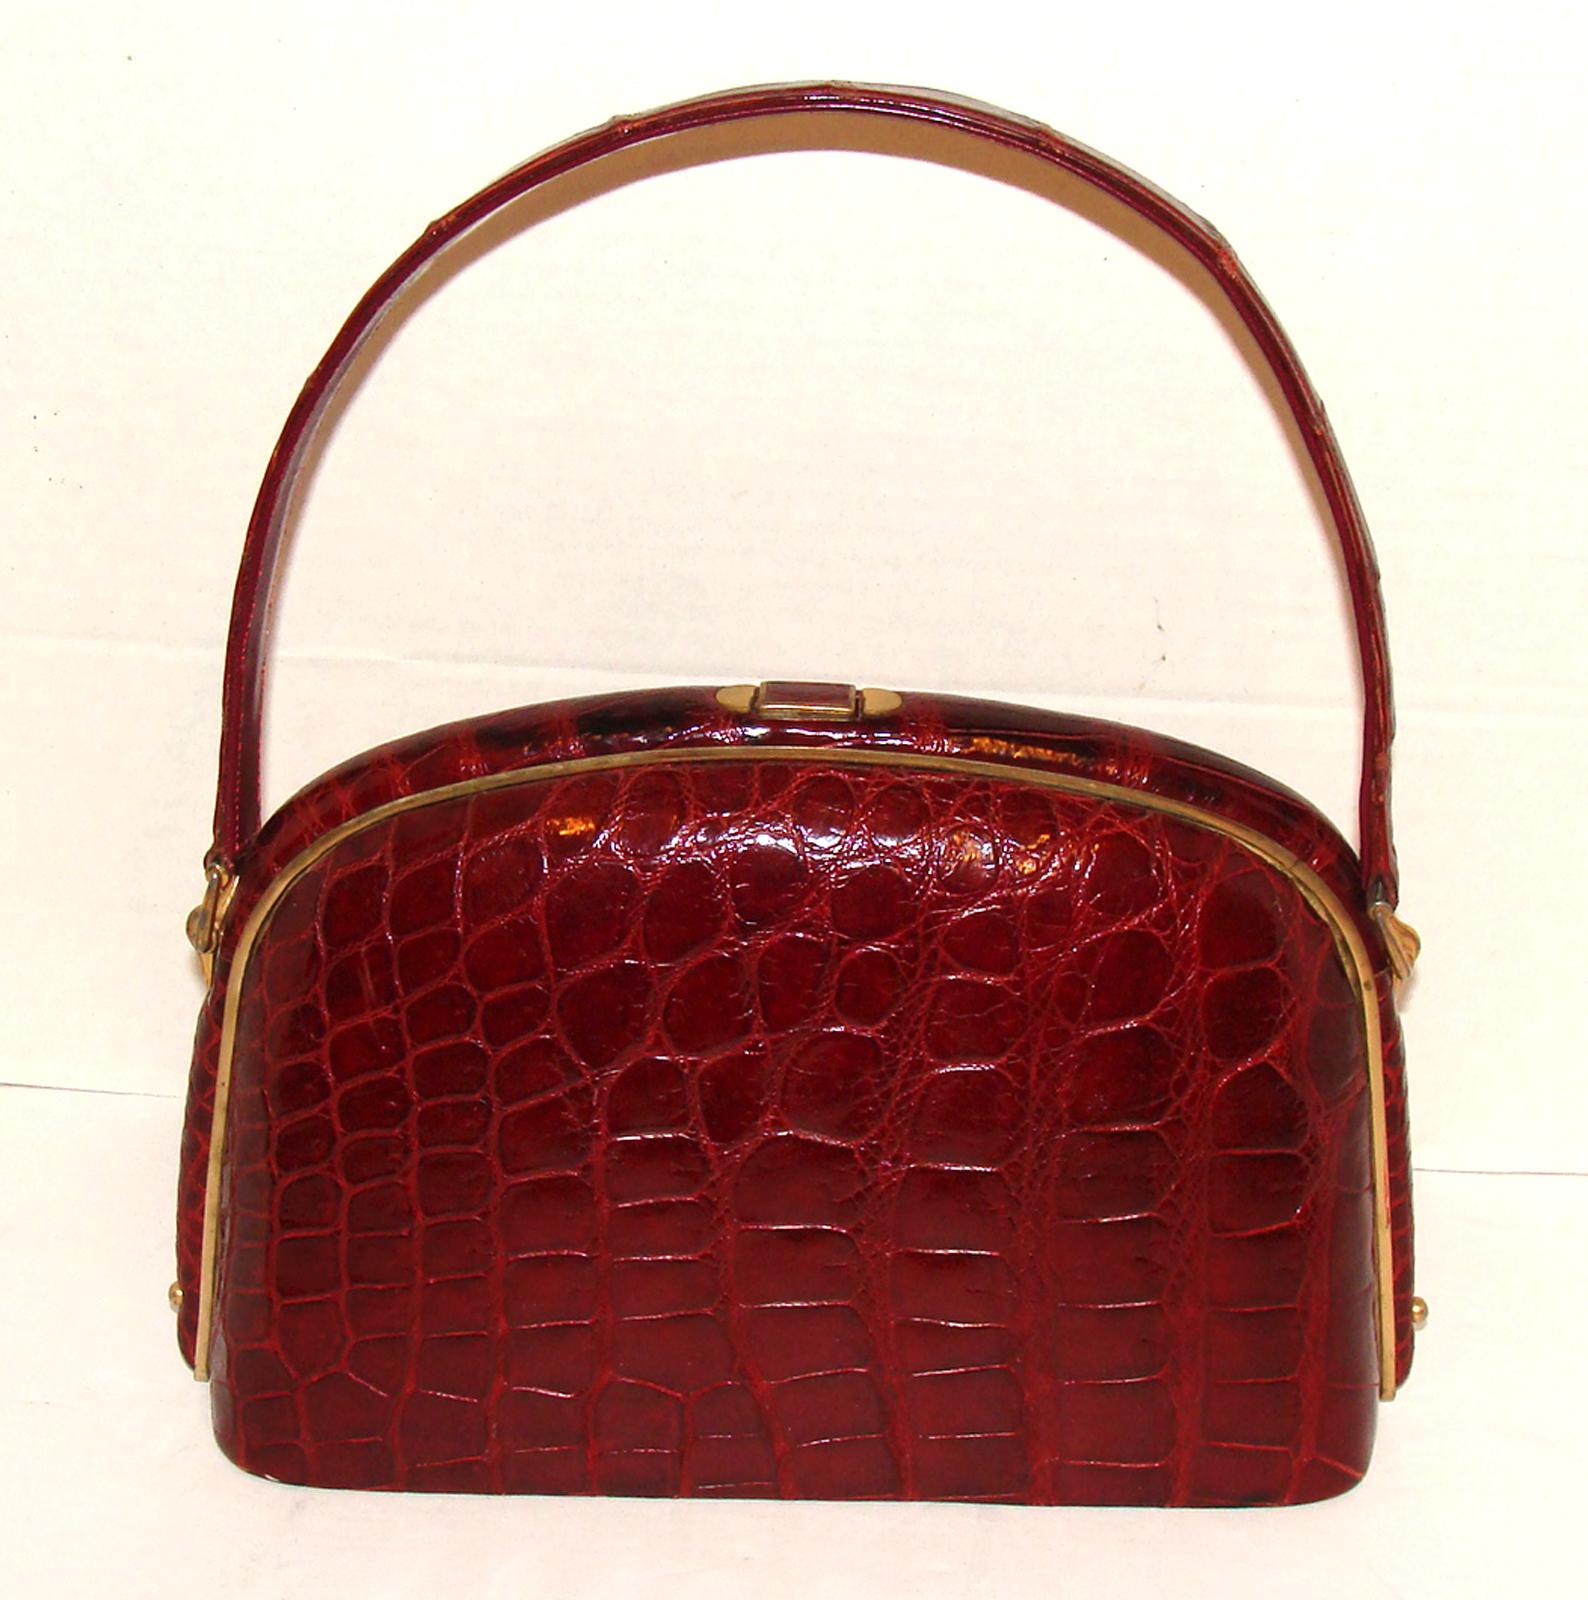 This roomy and stunning deep red alligator bag is a delight and has a classic, timeless style.  

The bag doesn't appear overly large but is actually quite roomy and easily accommodates a large format iPhone, sunglasses and any other items you need